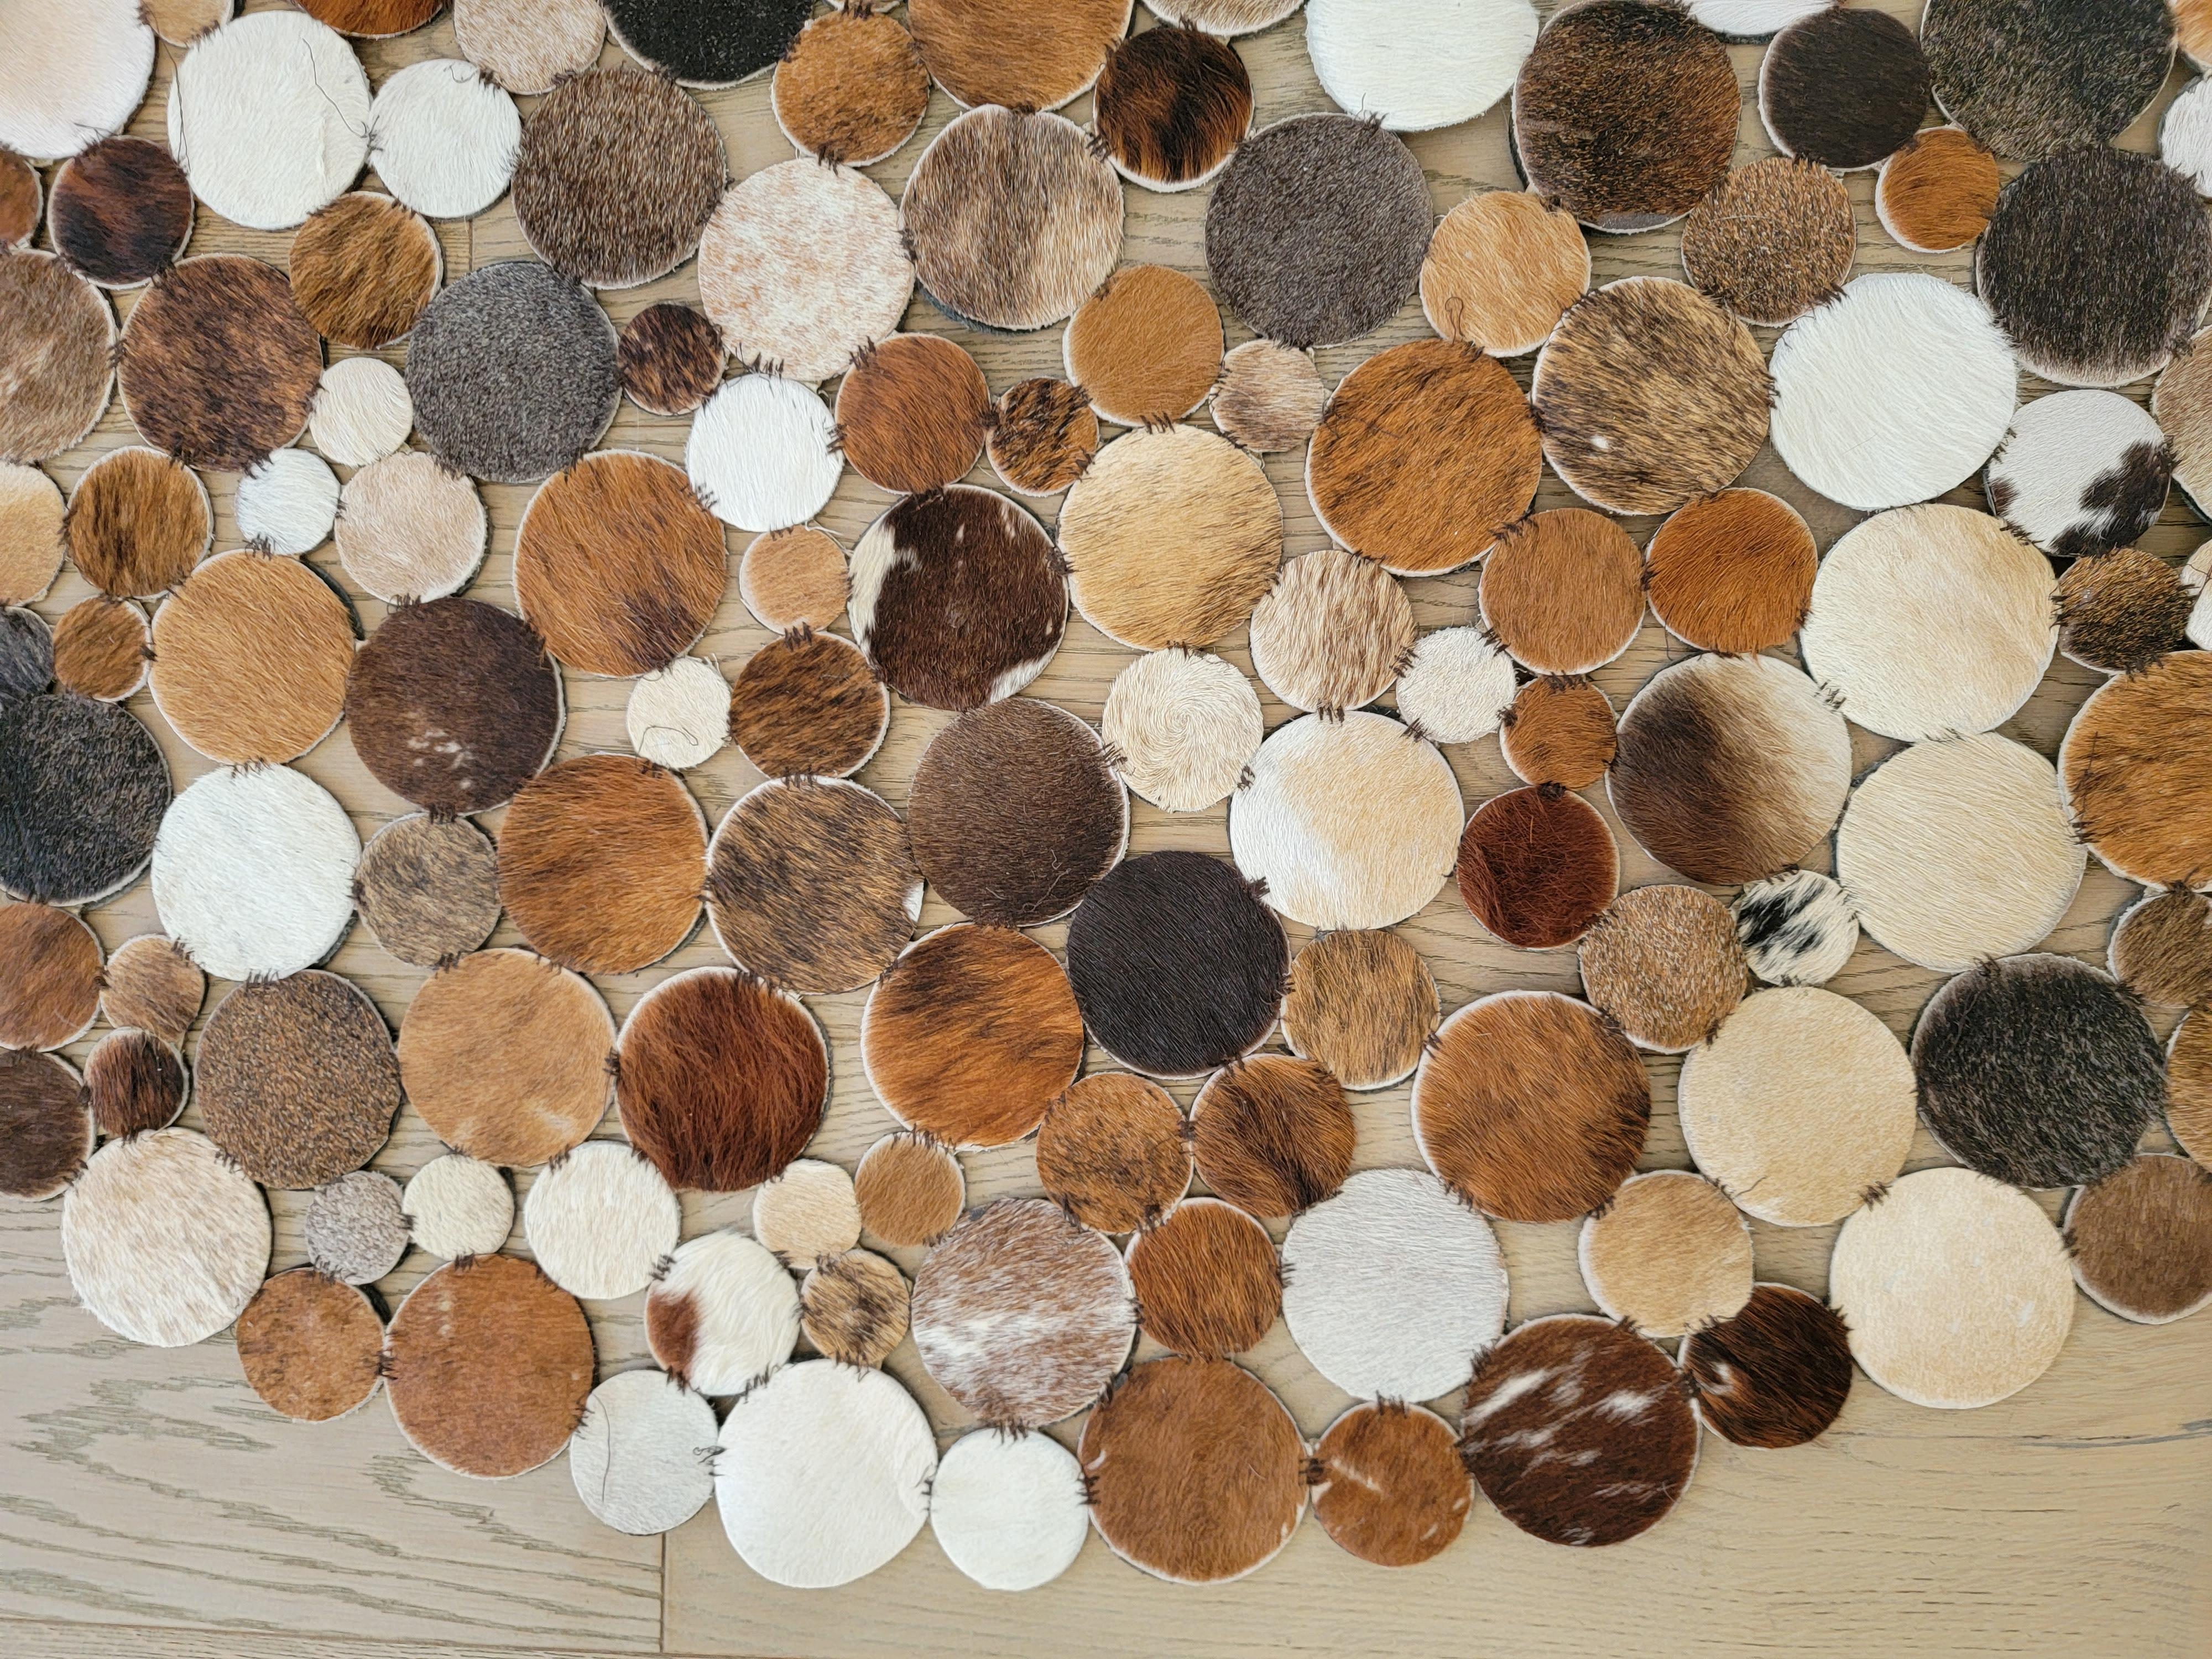 Midcentury Brazilian Leather rug. Circular patches make this rug. The different browns in the rug make a wonderous design. Each circular patch is identical in size.